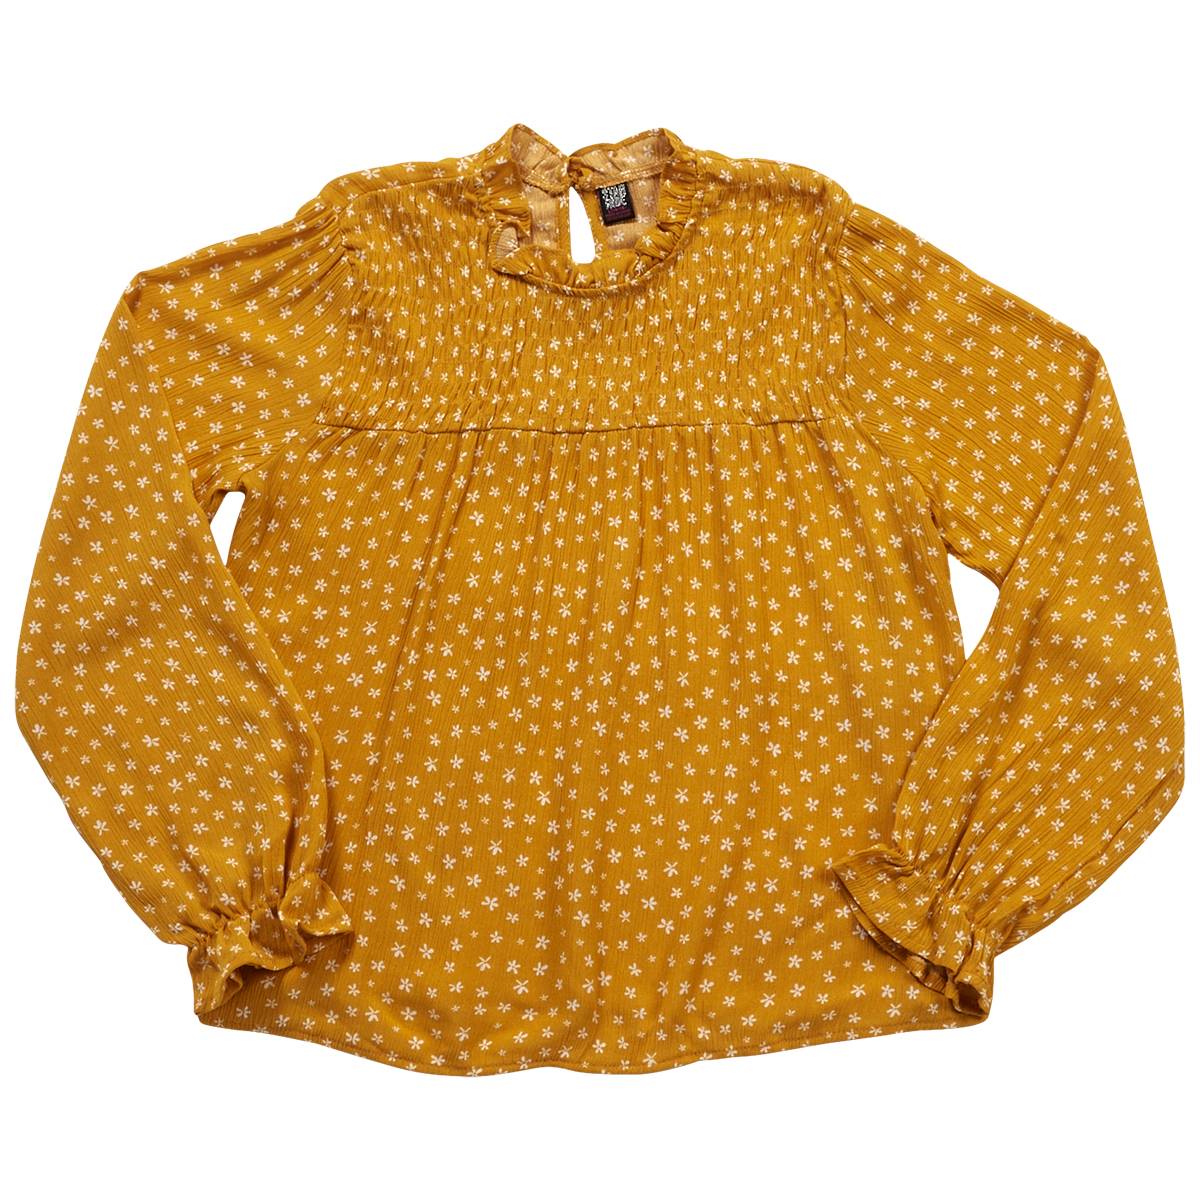 Girls (7-16) Star Ride(R) Floral Woven Top W/ Smocked Yoke - Yellow